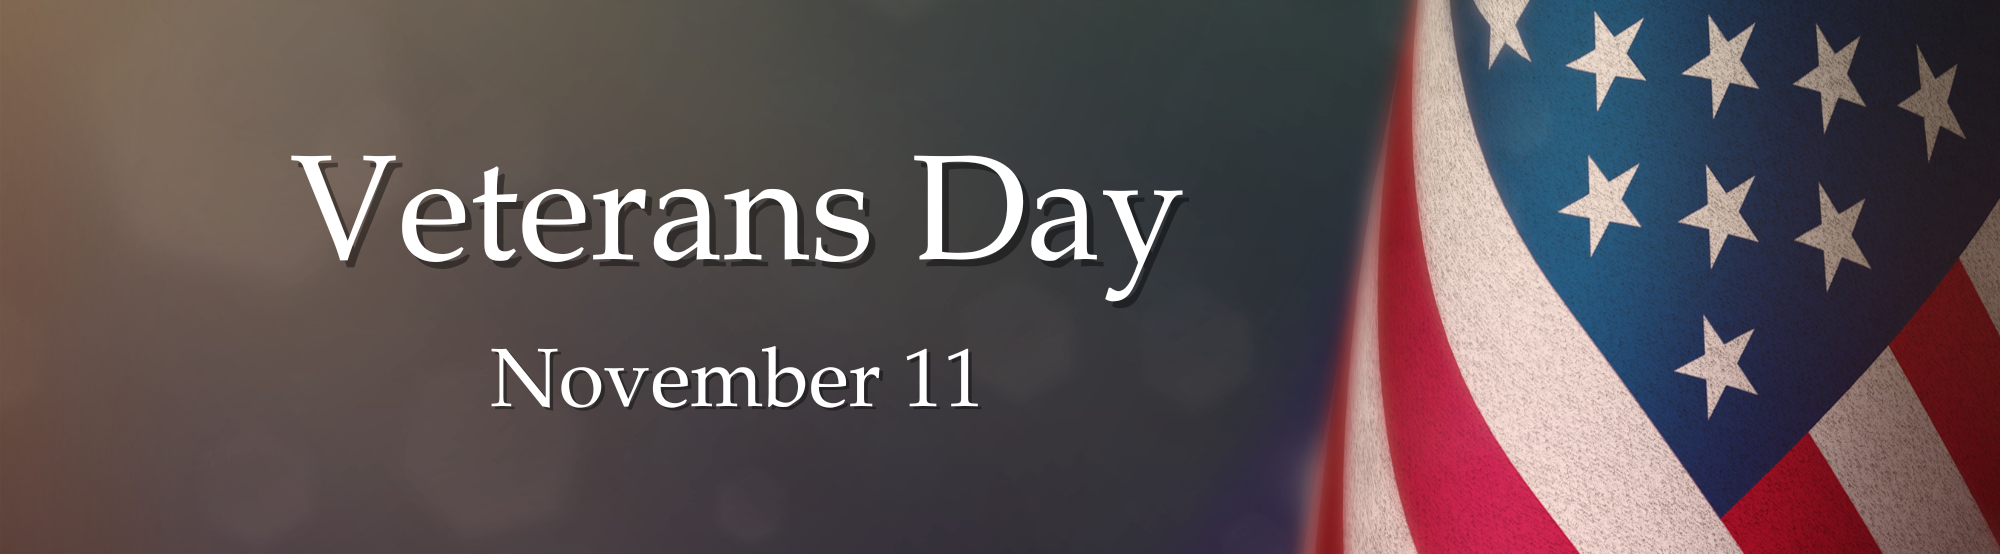 Image of an American flag next to the text: Veterans Day November 11